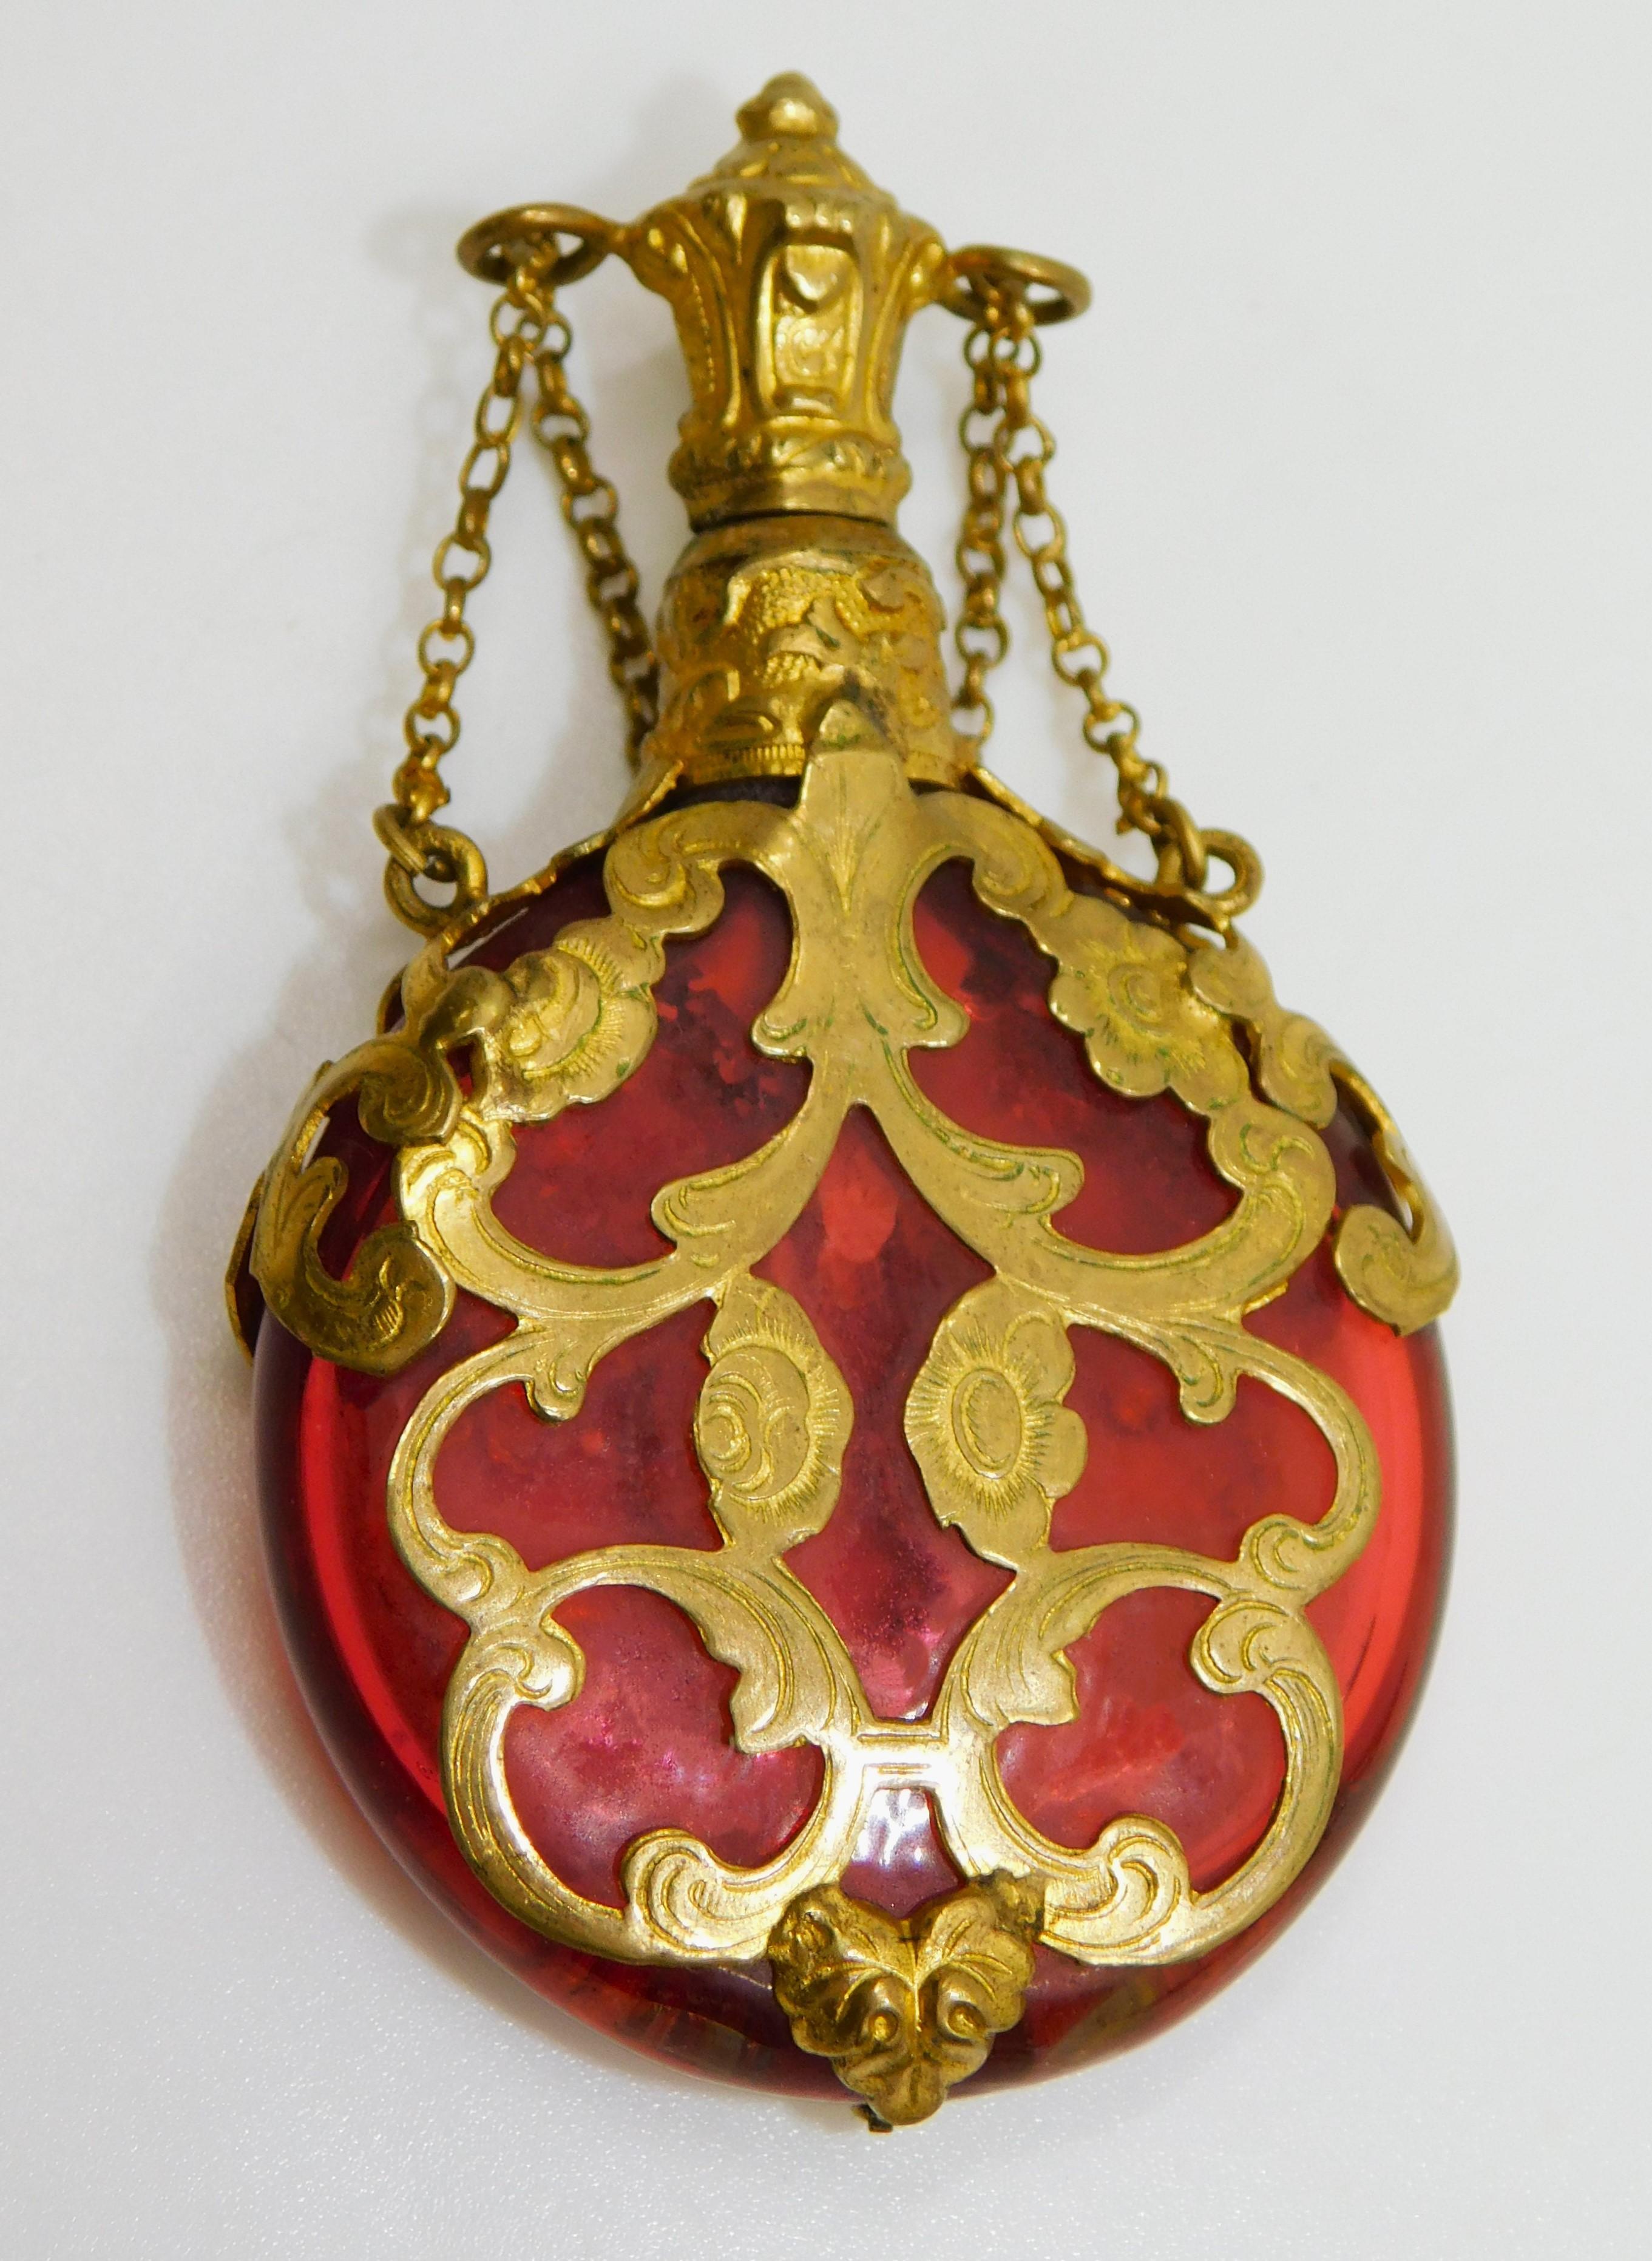 This beautiful late 19th Century antique red cranberry glass, gold overlay filigree perfume or scent bottle comes with original stopper top/lid and chain.  In great condition, (stand not included).